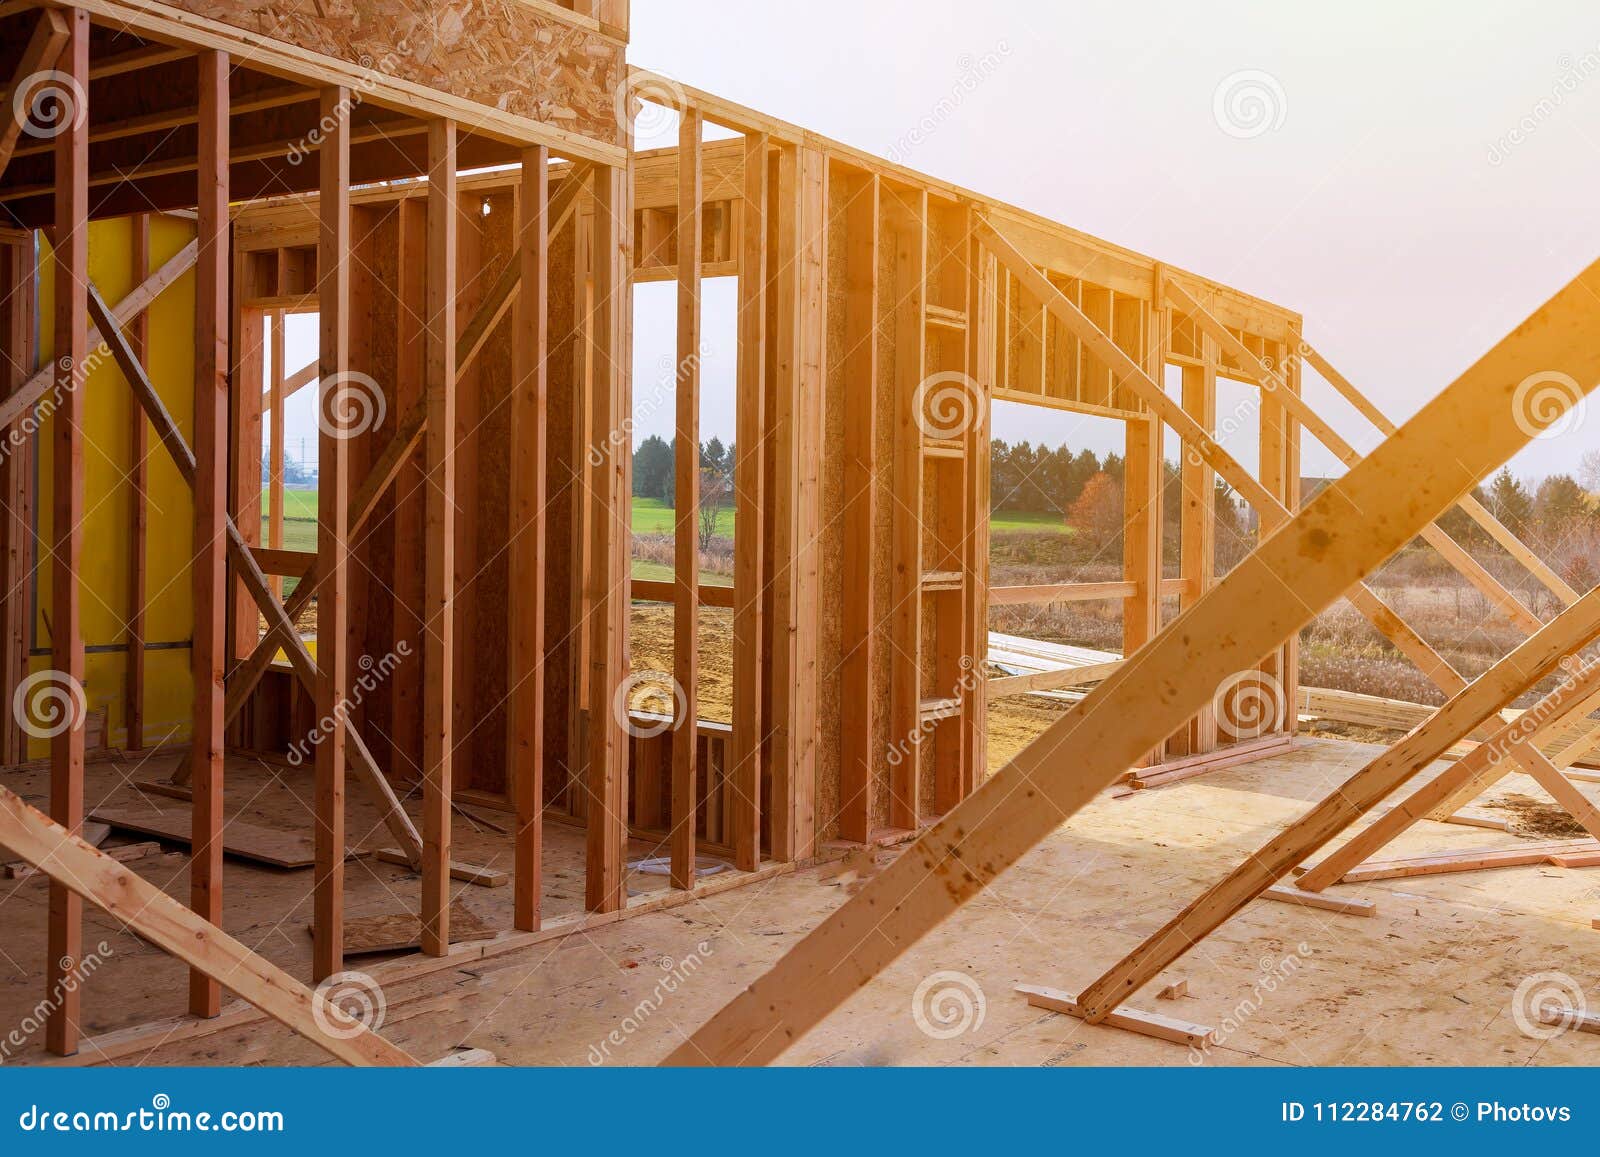 New Home Construction of a Cement Block Home with Wooden Roof Stock